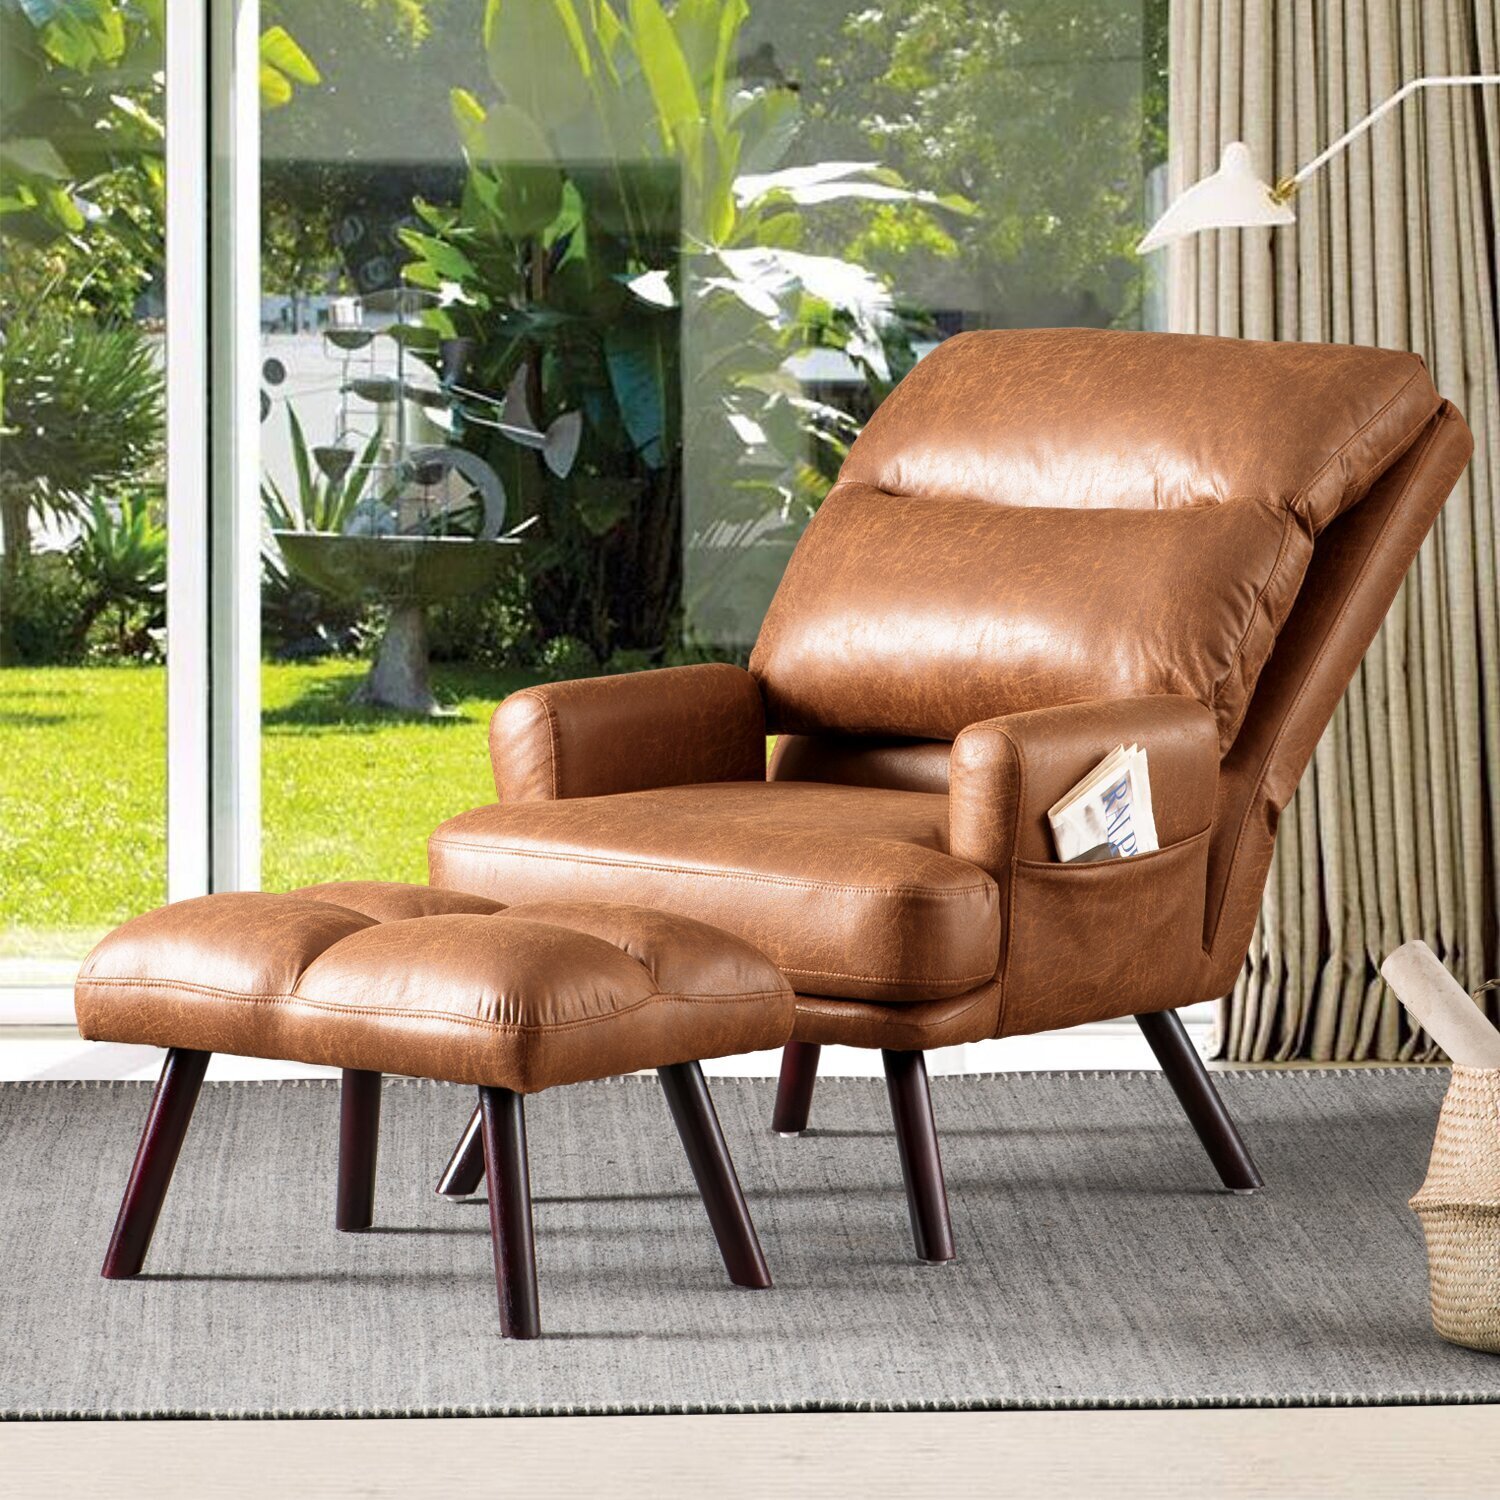 Comfortable Recliner With Ottoman